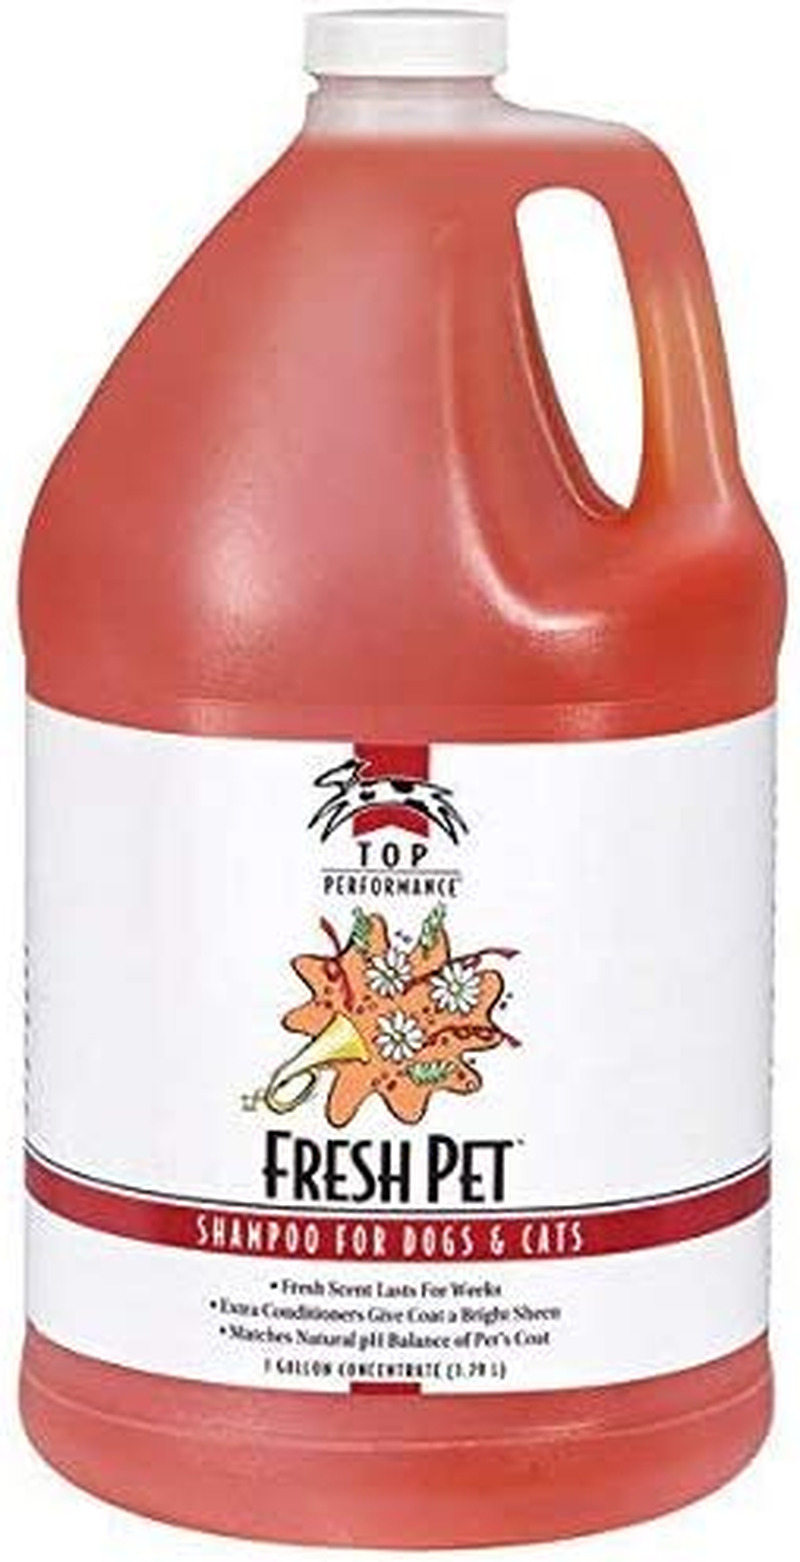 Fresh Pet Shampoo Concentrate Gallon Dog & Cat Professional Grooming Washing Use